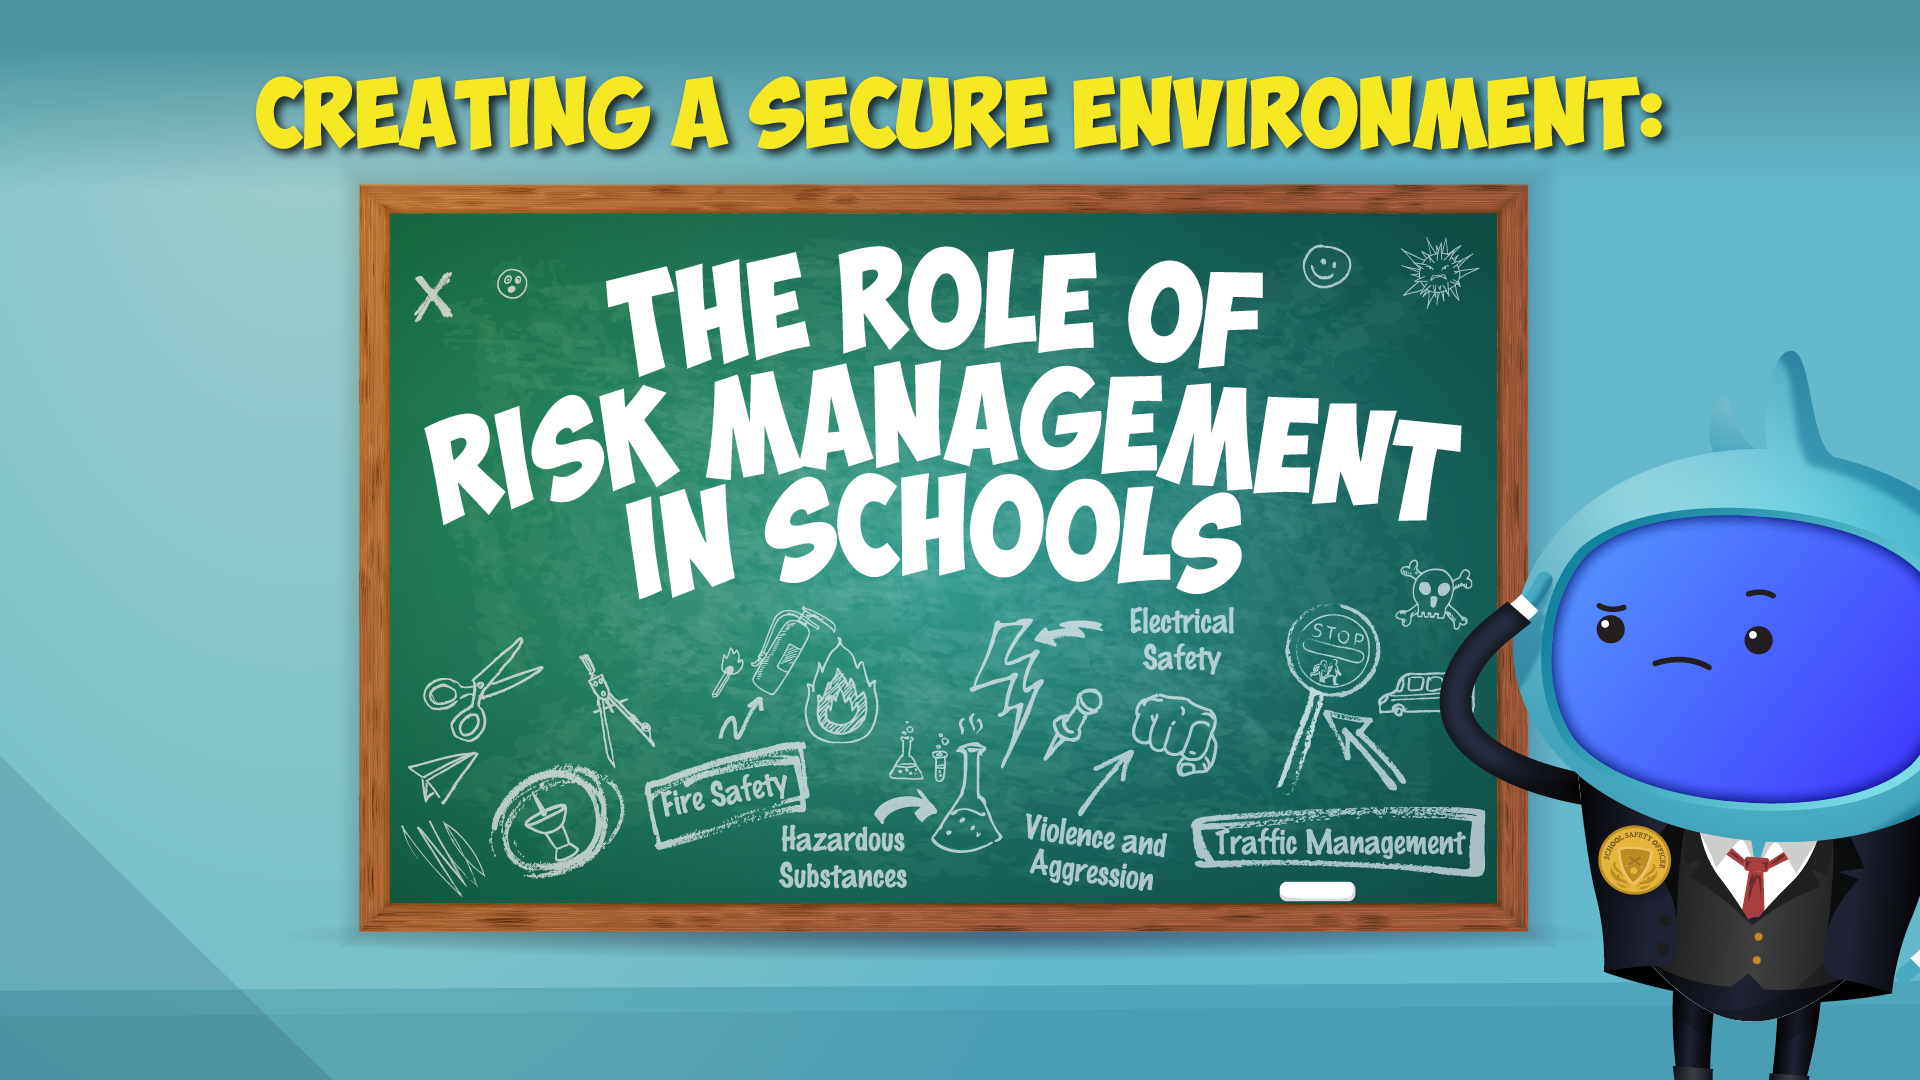 The Role of Risk Management in Schools